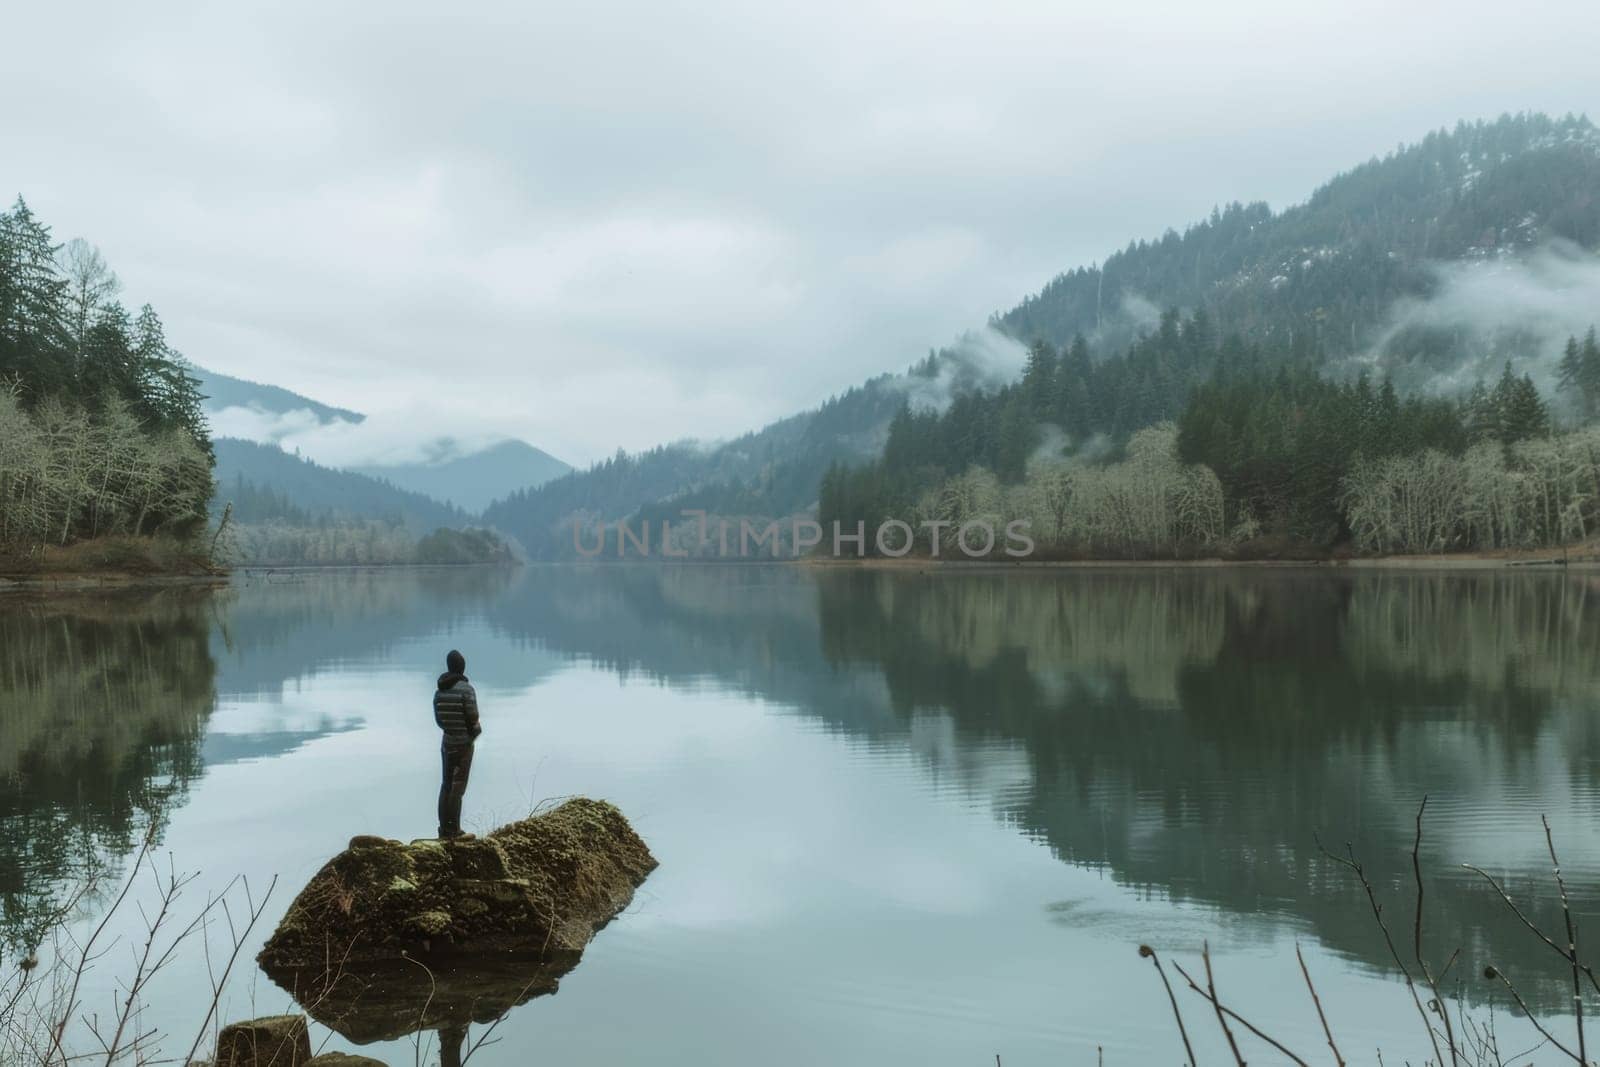 A photographer stands at the edge of a peaceful lake, camera on tripod, capturing the stillness of water and the quiet mood of a foggy landscape.